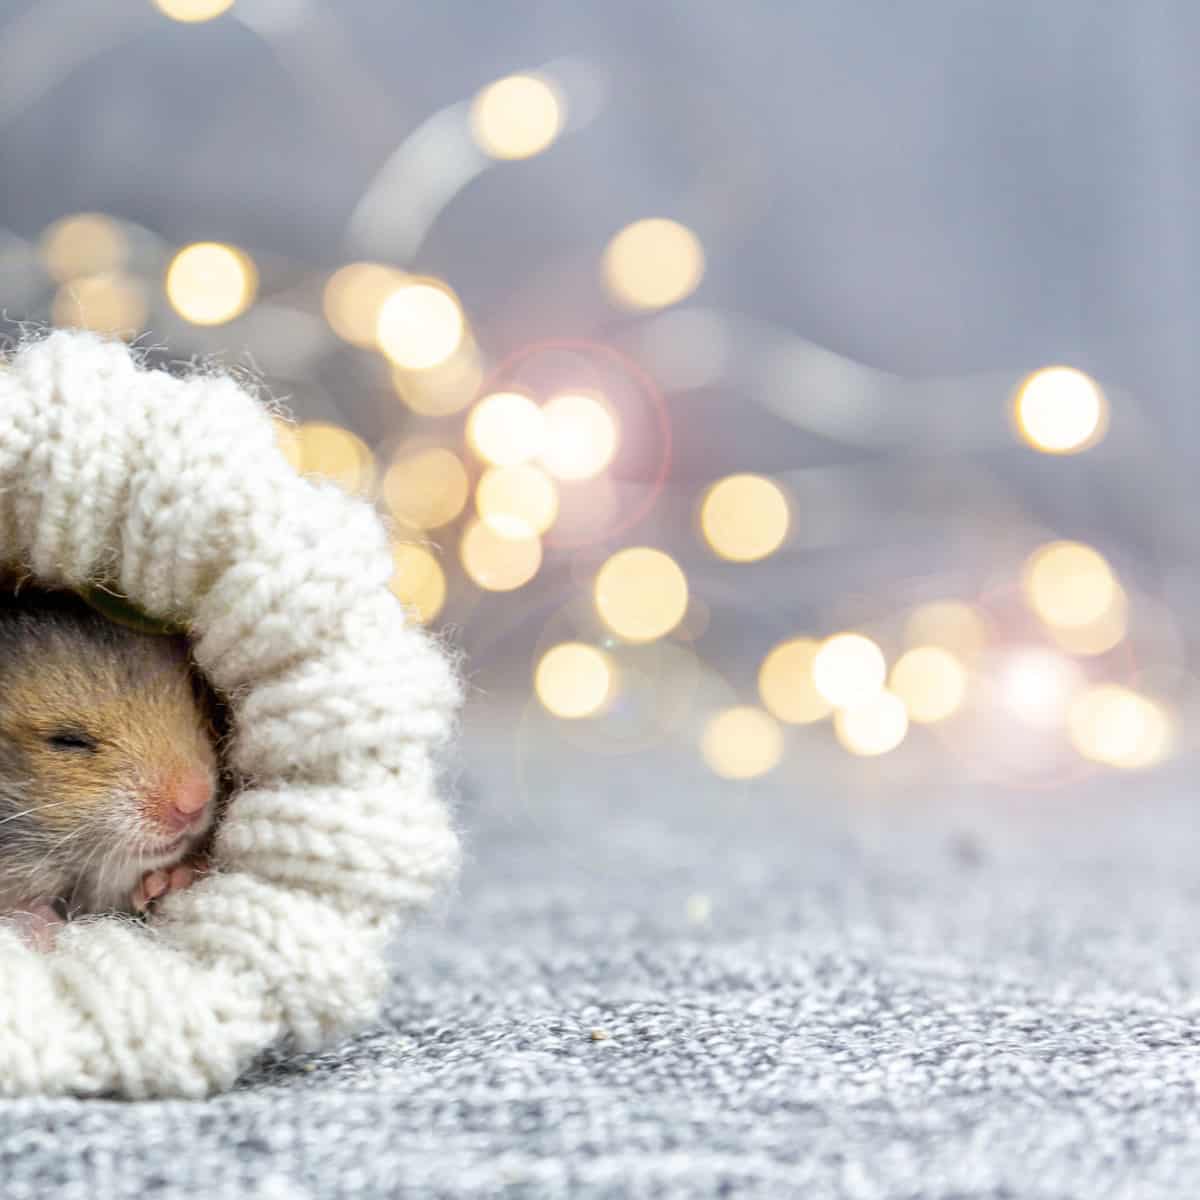 A hamster sleeping comfortably inside a knitted sock